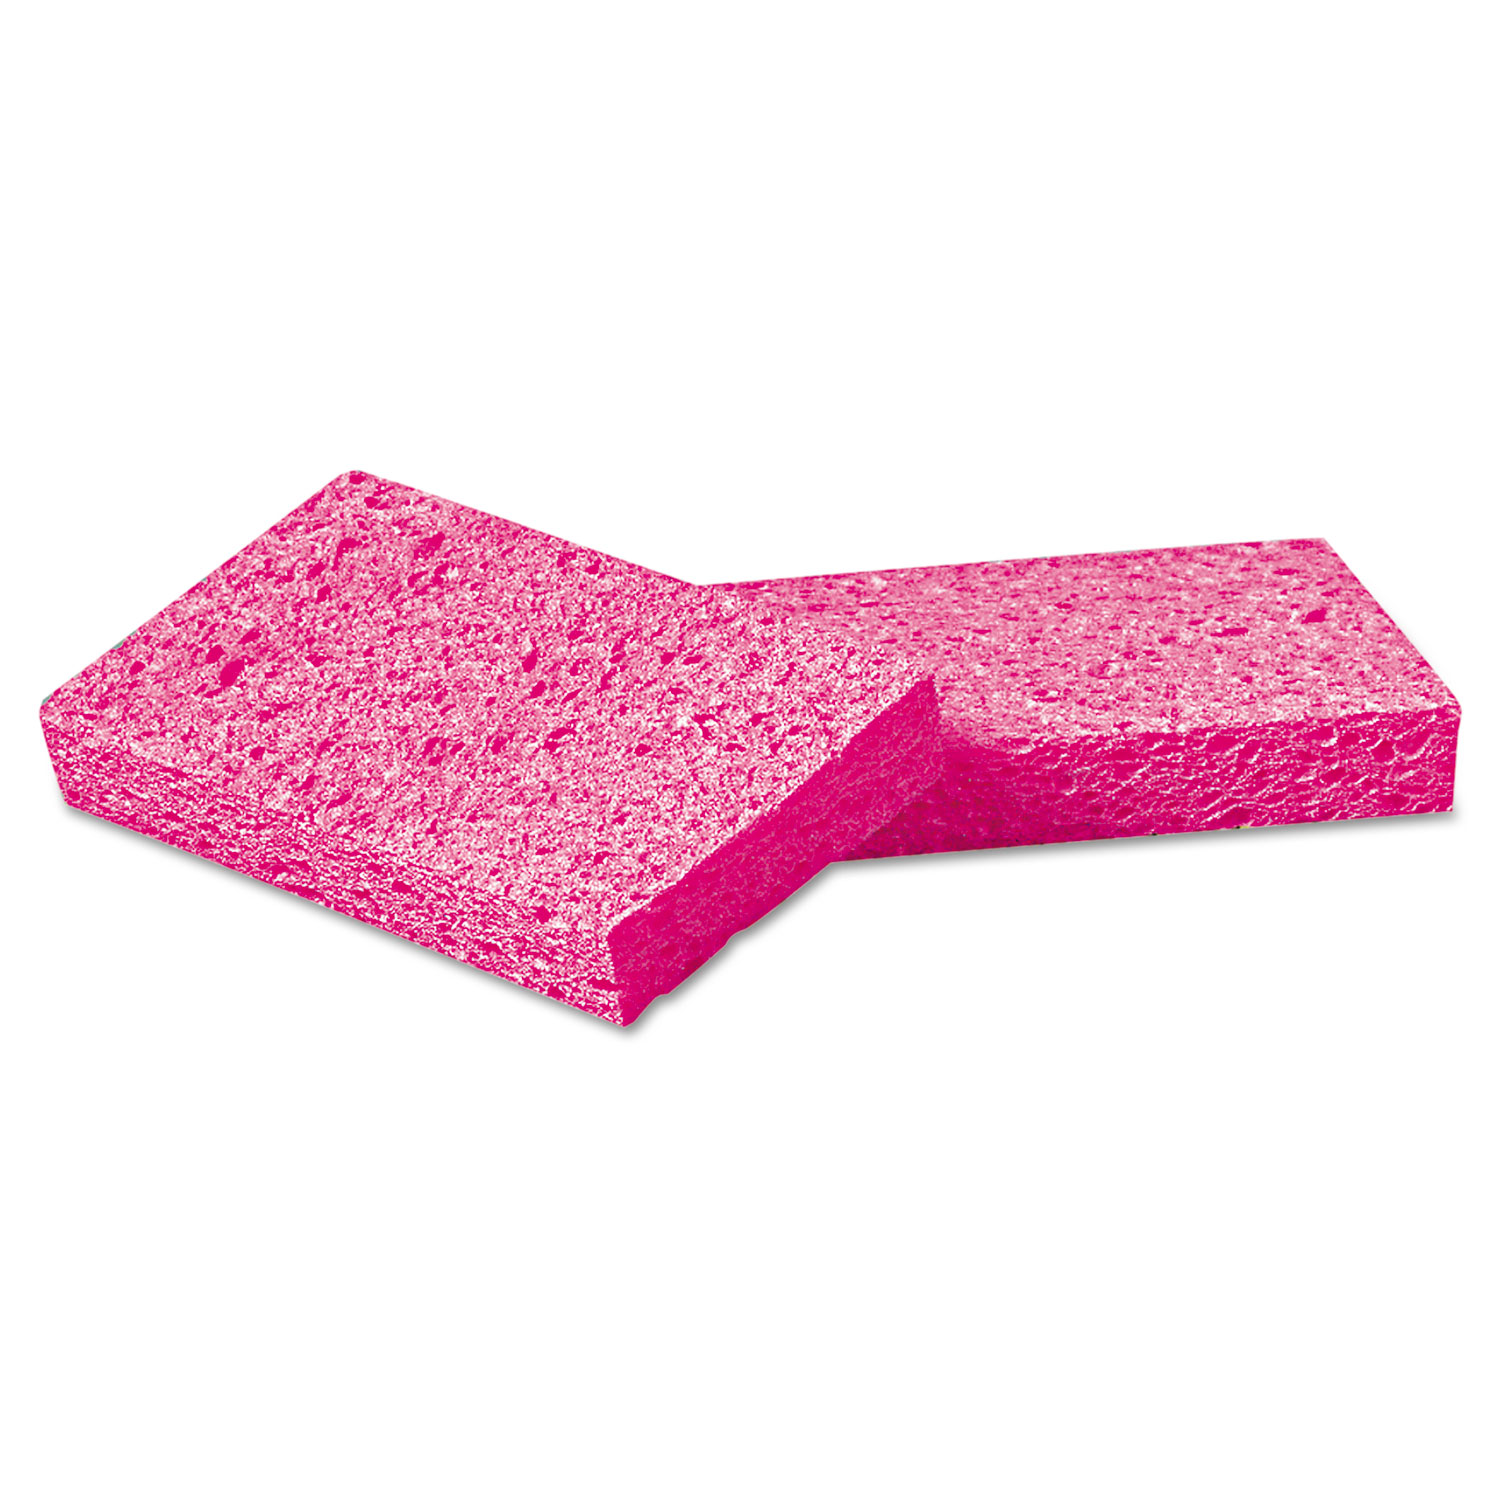  Boardwalk A21BWK Small Cellulose Sponge, 3 3/5 x 6 1/2, 9/10 Thick, Pink, 2/Pack, 24 Packs/CT (BWKCS1A) 